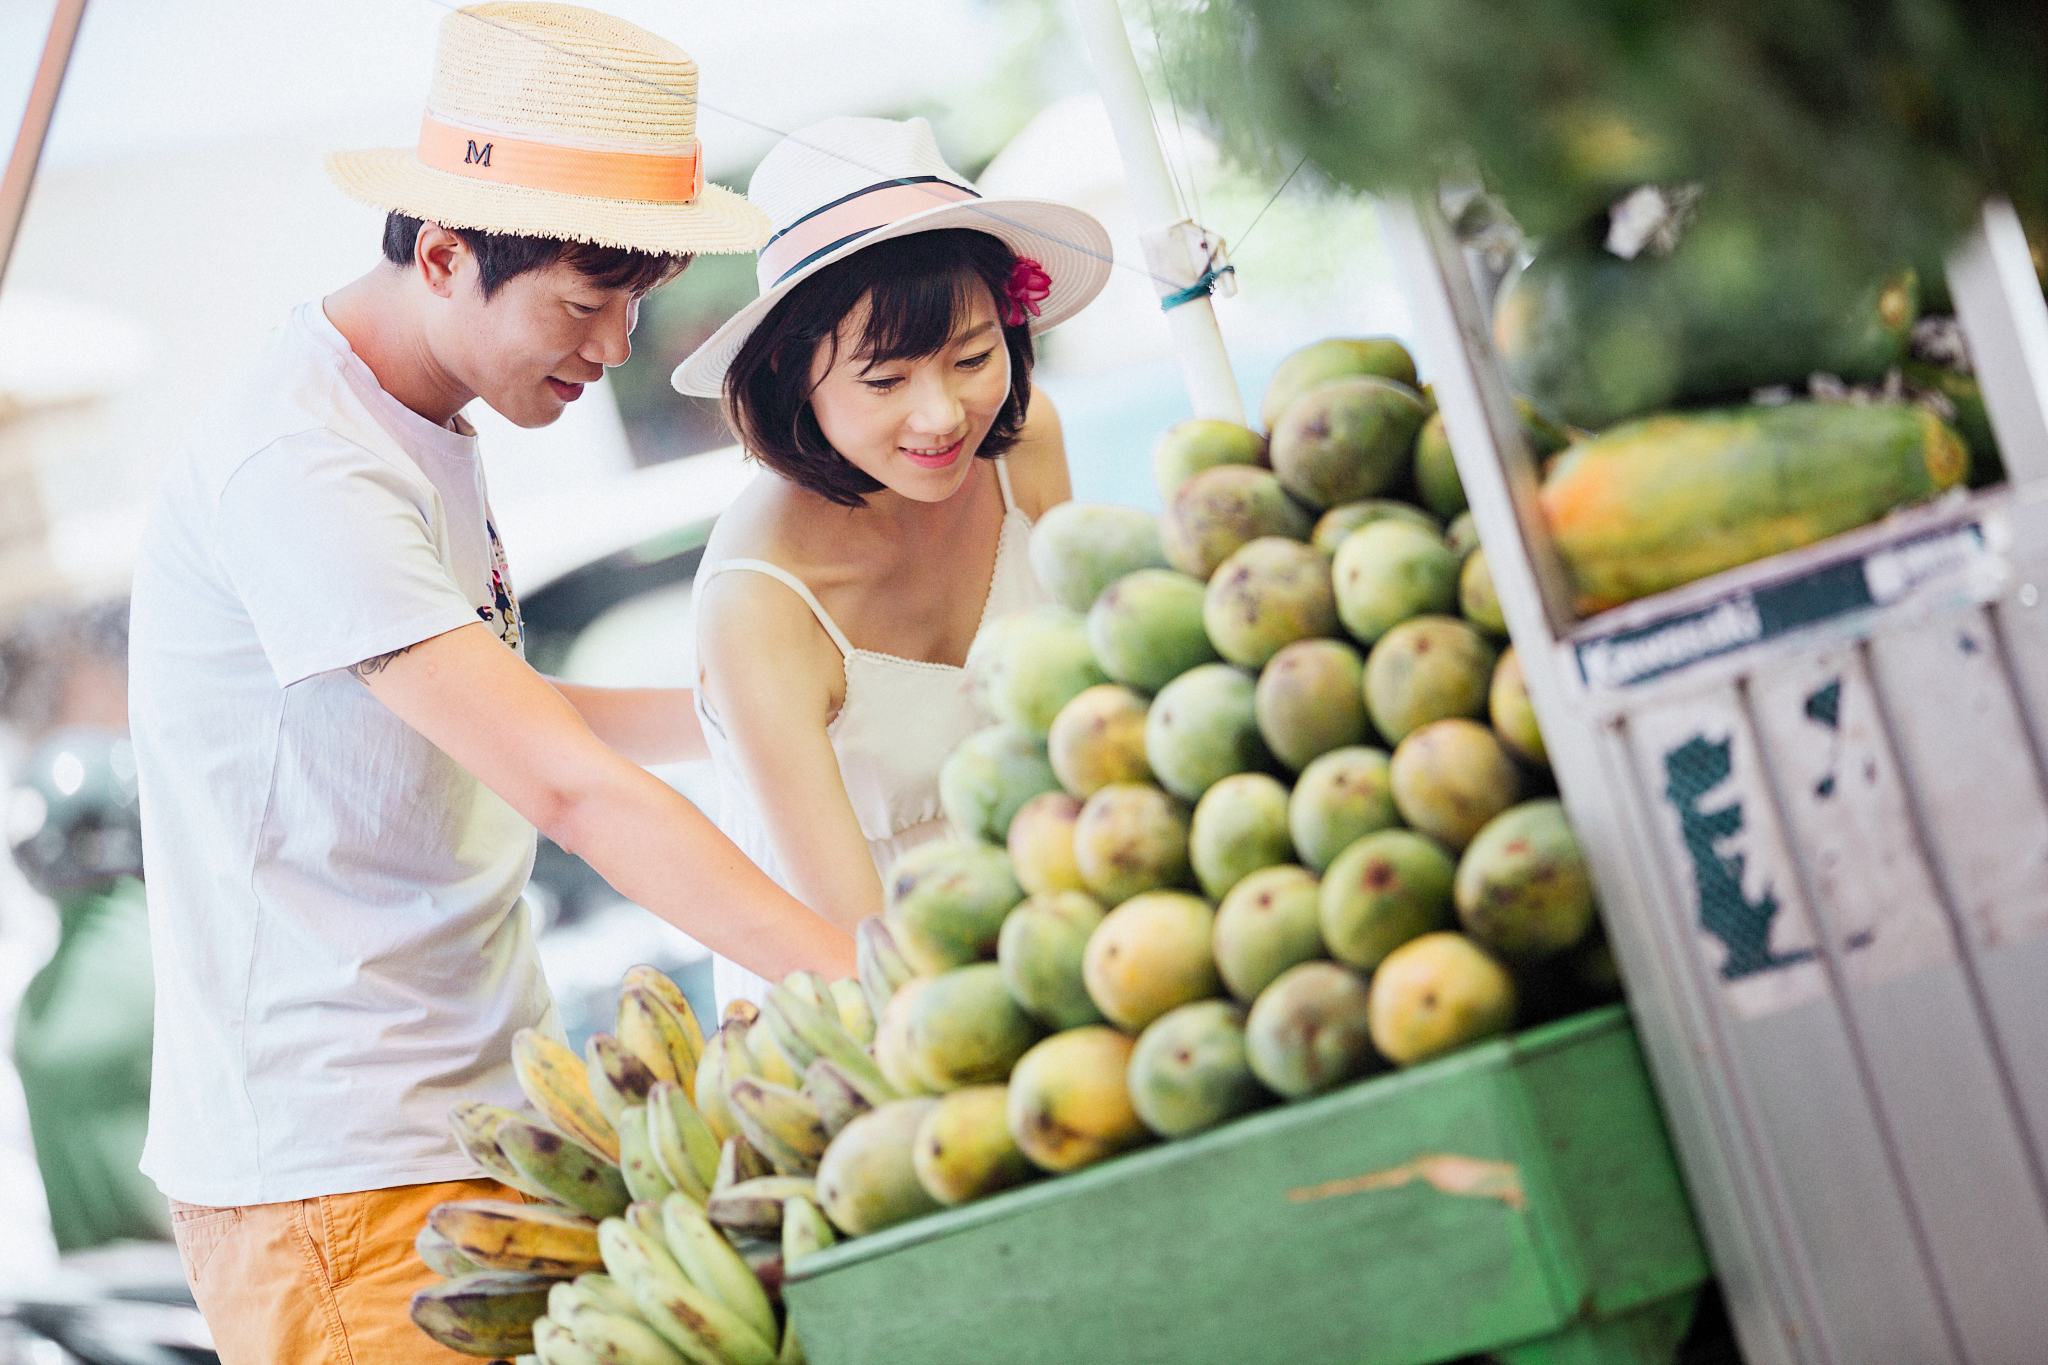 Picture of a man and woman admiring fruits in a fruit stand